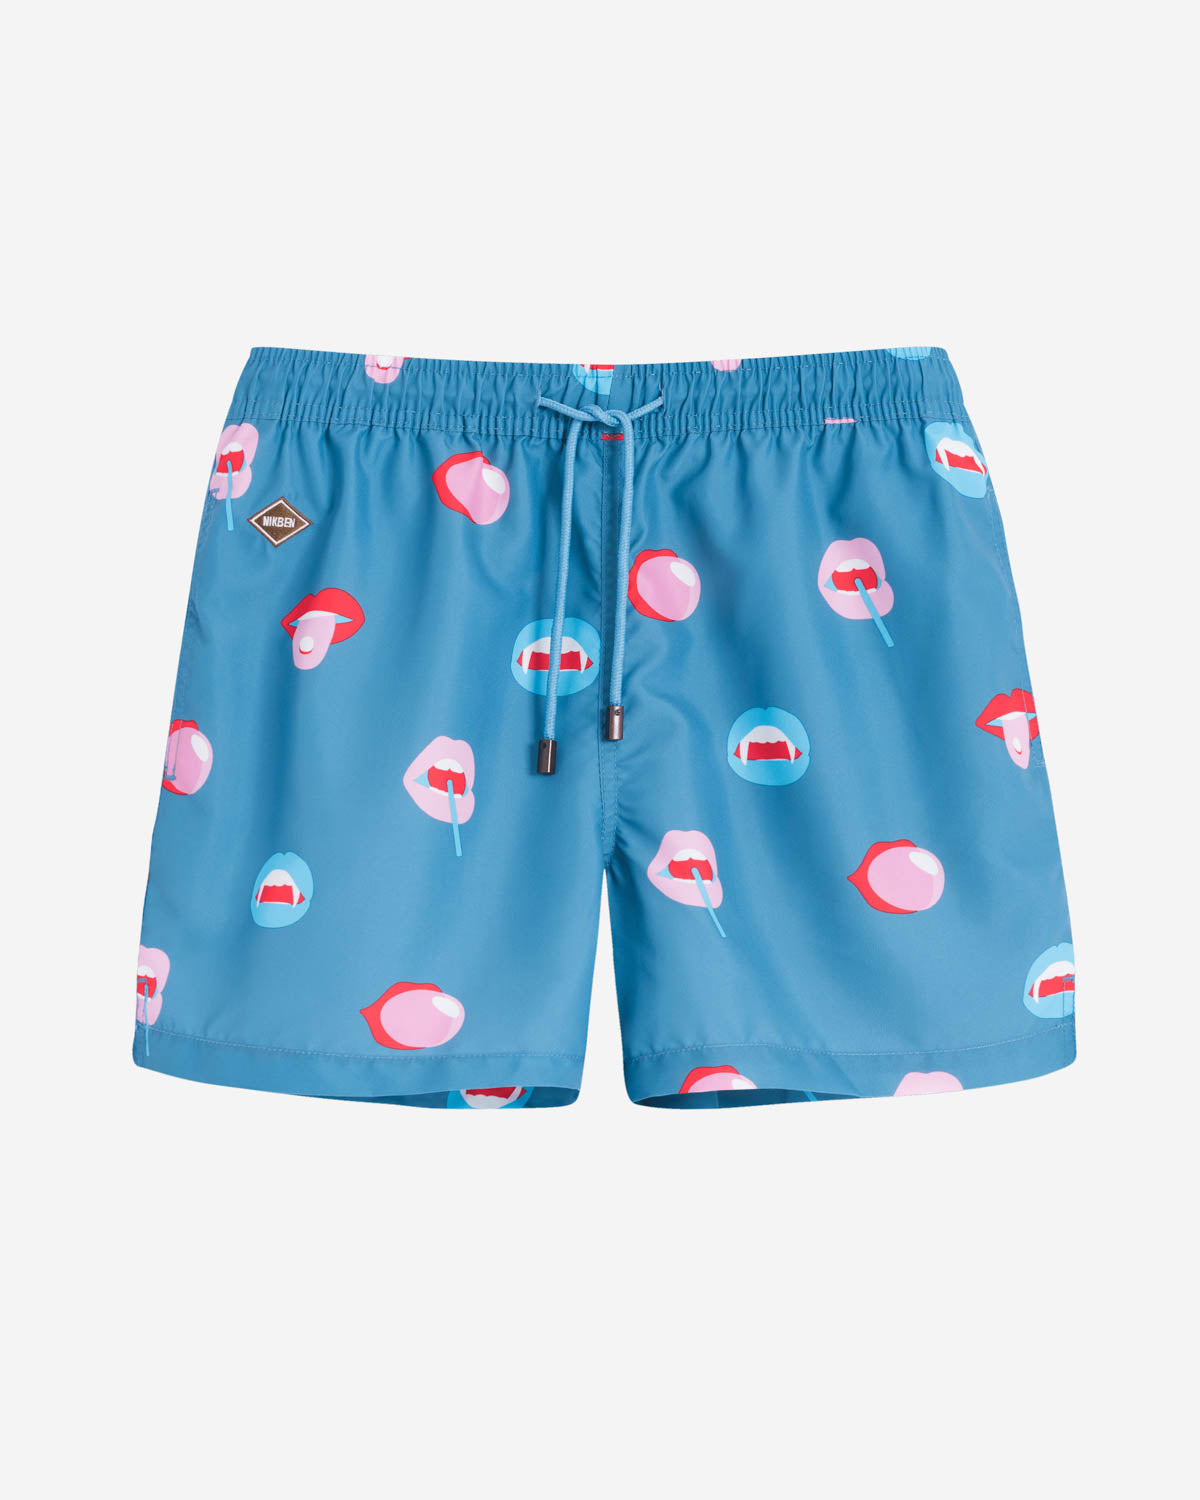 Blue swim trunks with mouth print. Mid length shorts with drawstring waistband and two side pockets.